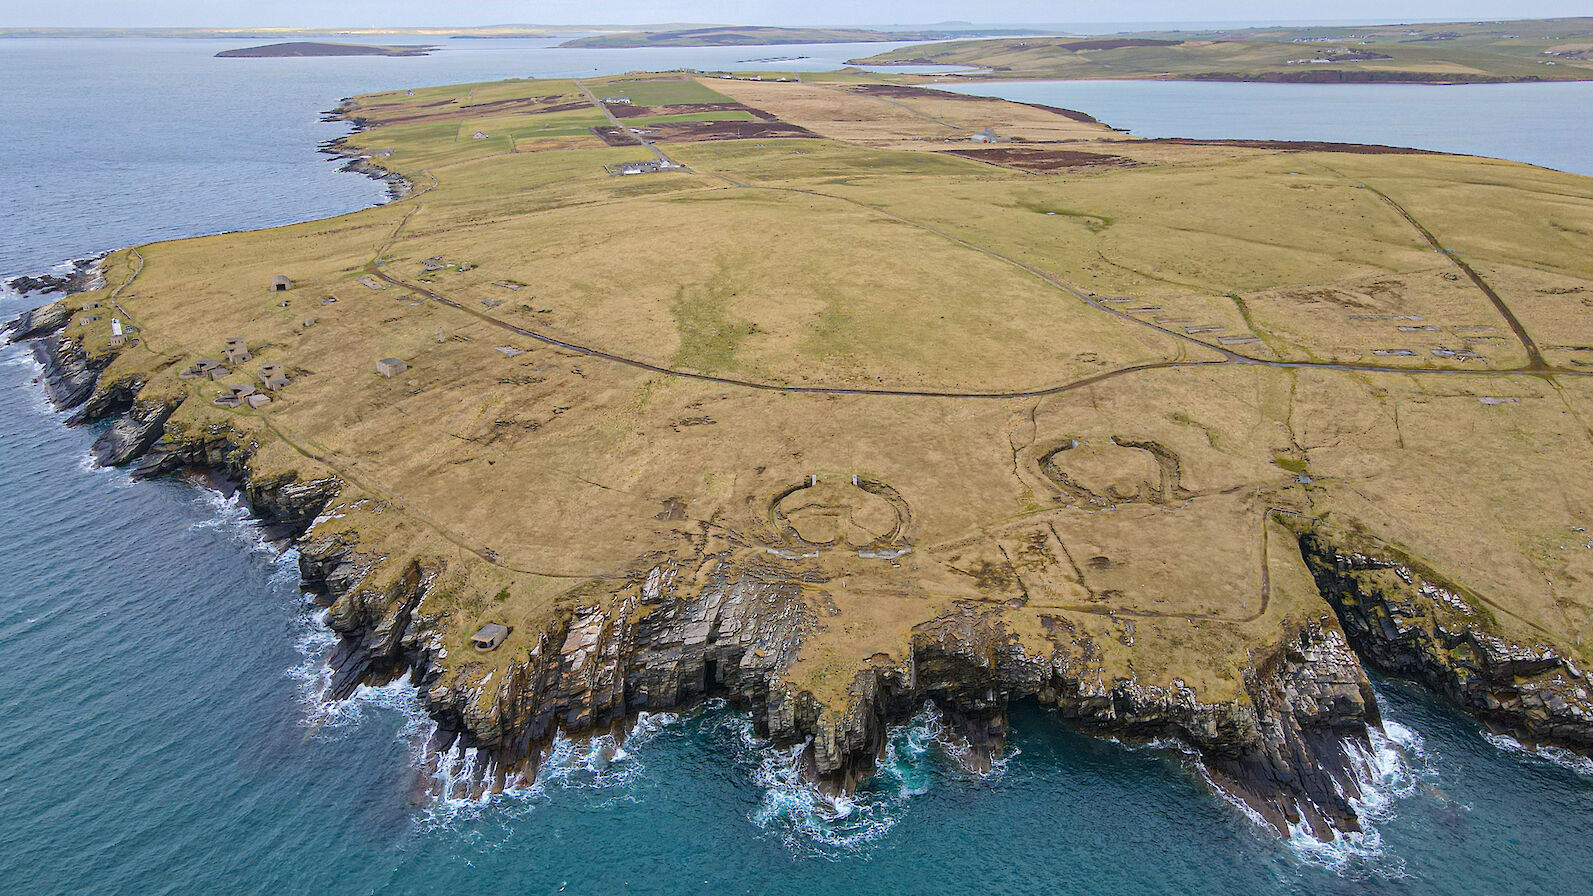 Aerial view of Hoxa Head, Orkney - image by Graham Campbell